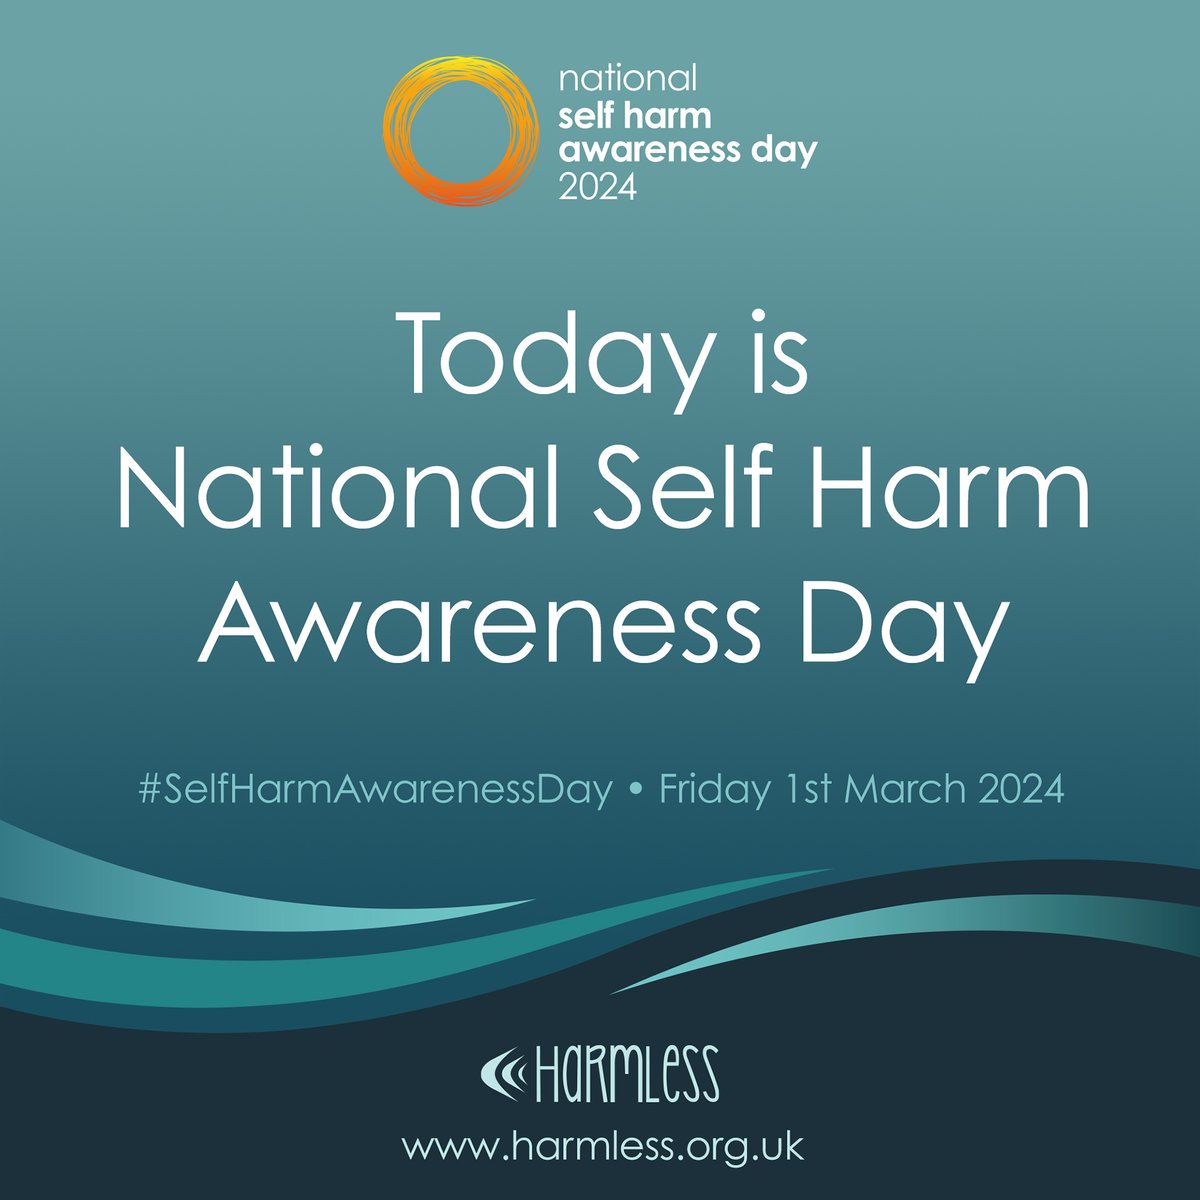 Today is #SelfHarmAwarenessDay. We are joining @Harmless and other organisations to raise awareness and dispel myths around this often misunderstood issue. Self-harm is a unique risk factor for suicide, so providing help and support is crucial. 🧵(1/7)